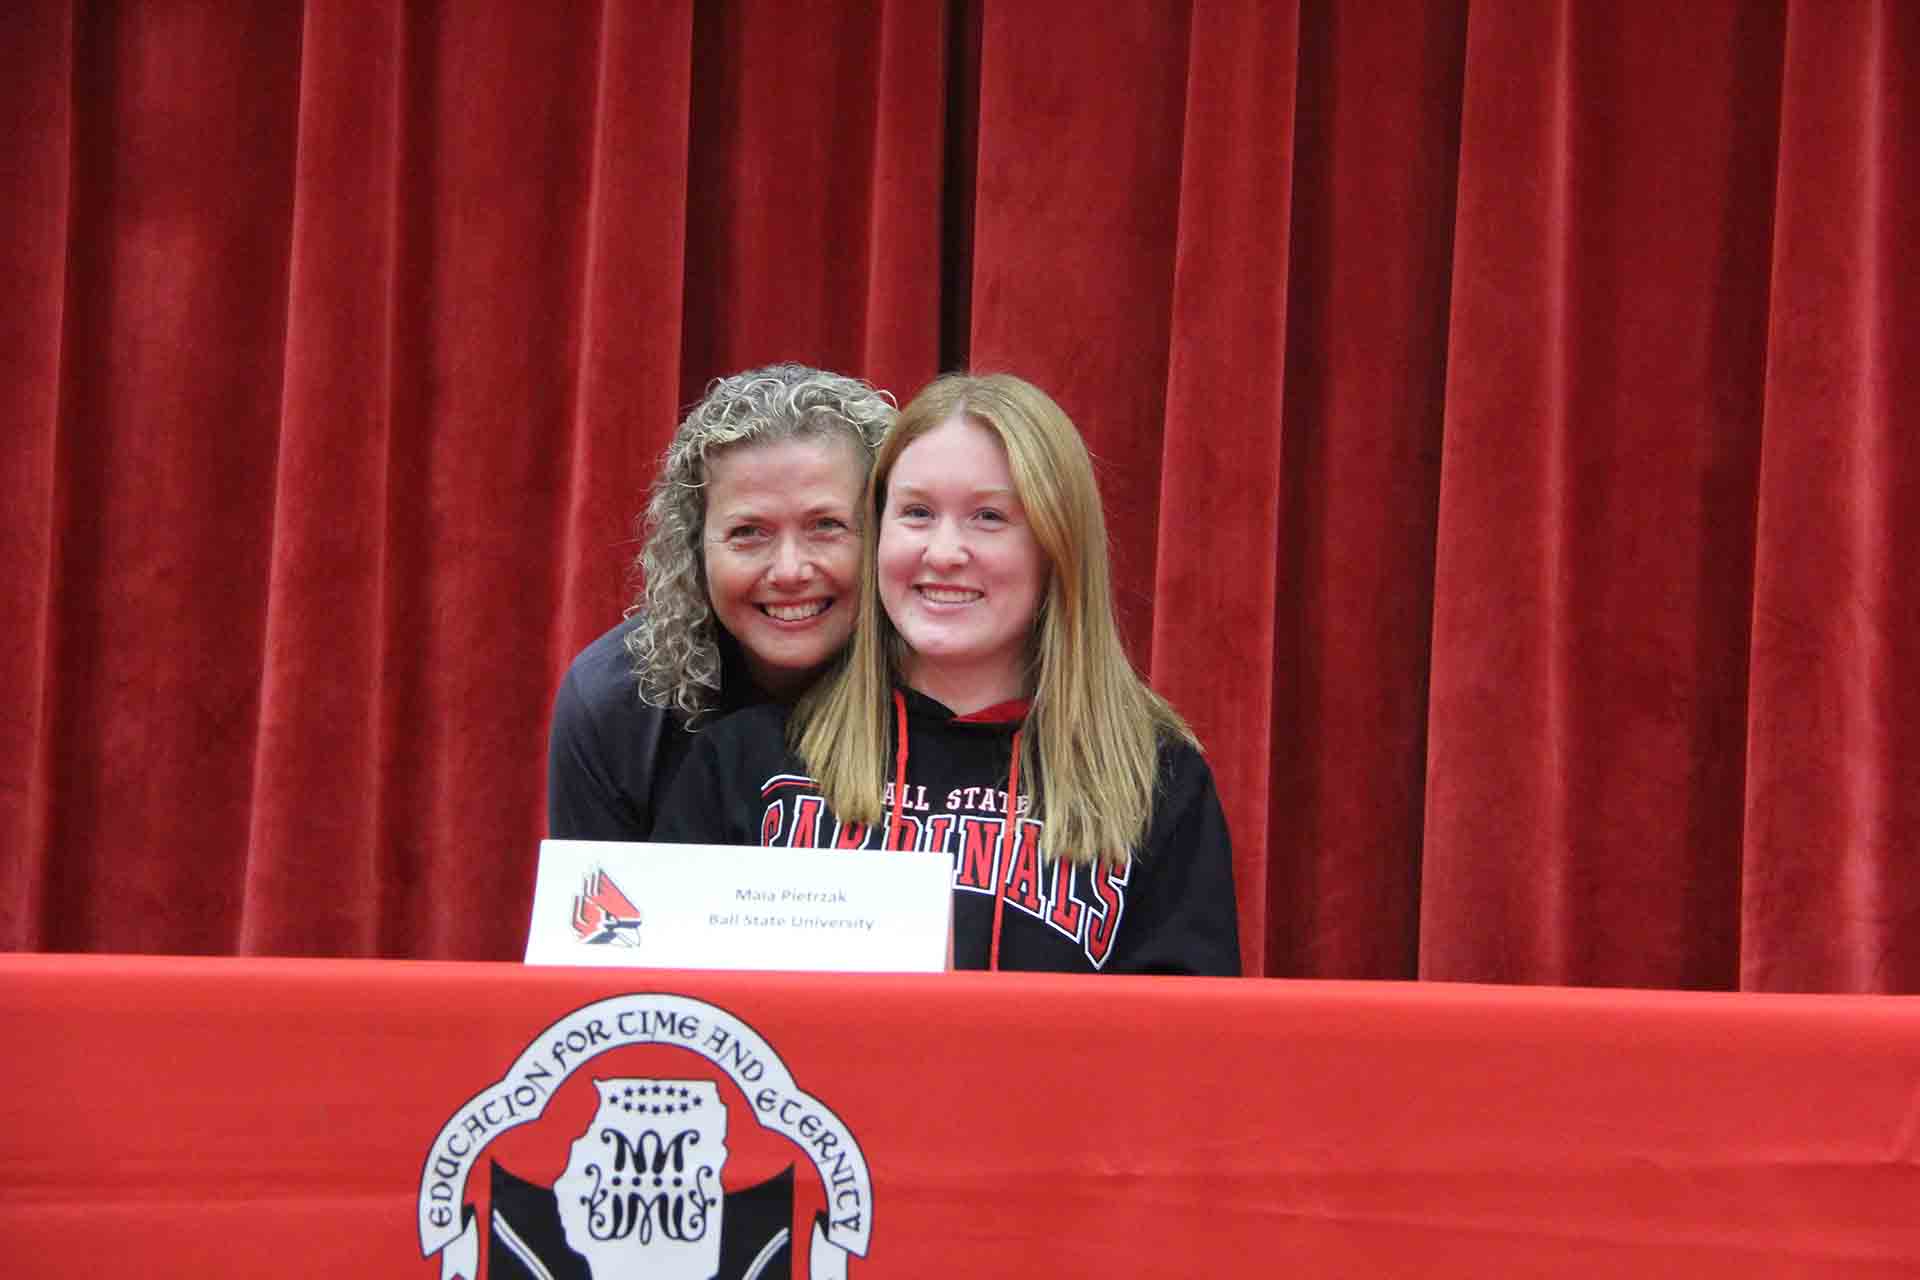 student-and-parent-at-college-signing-for-ball-state